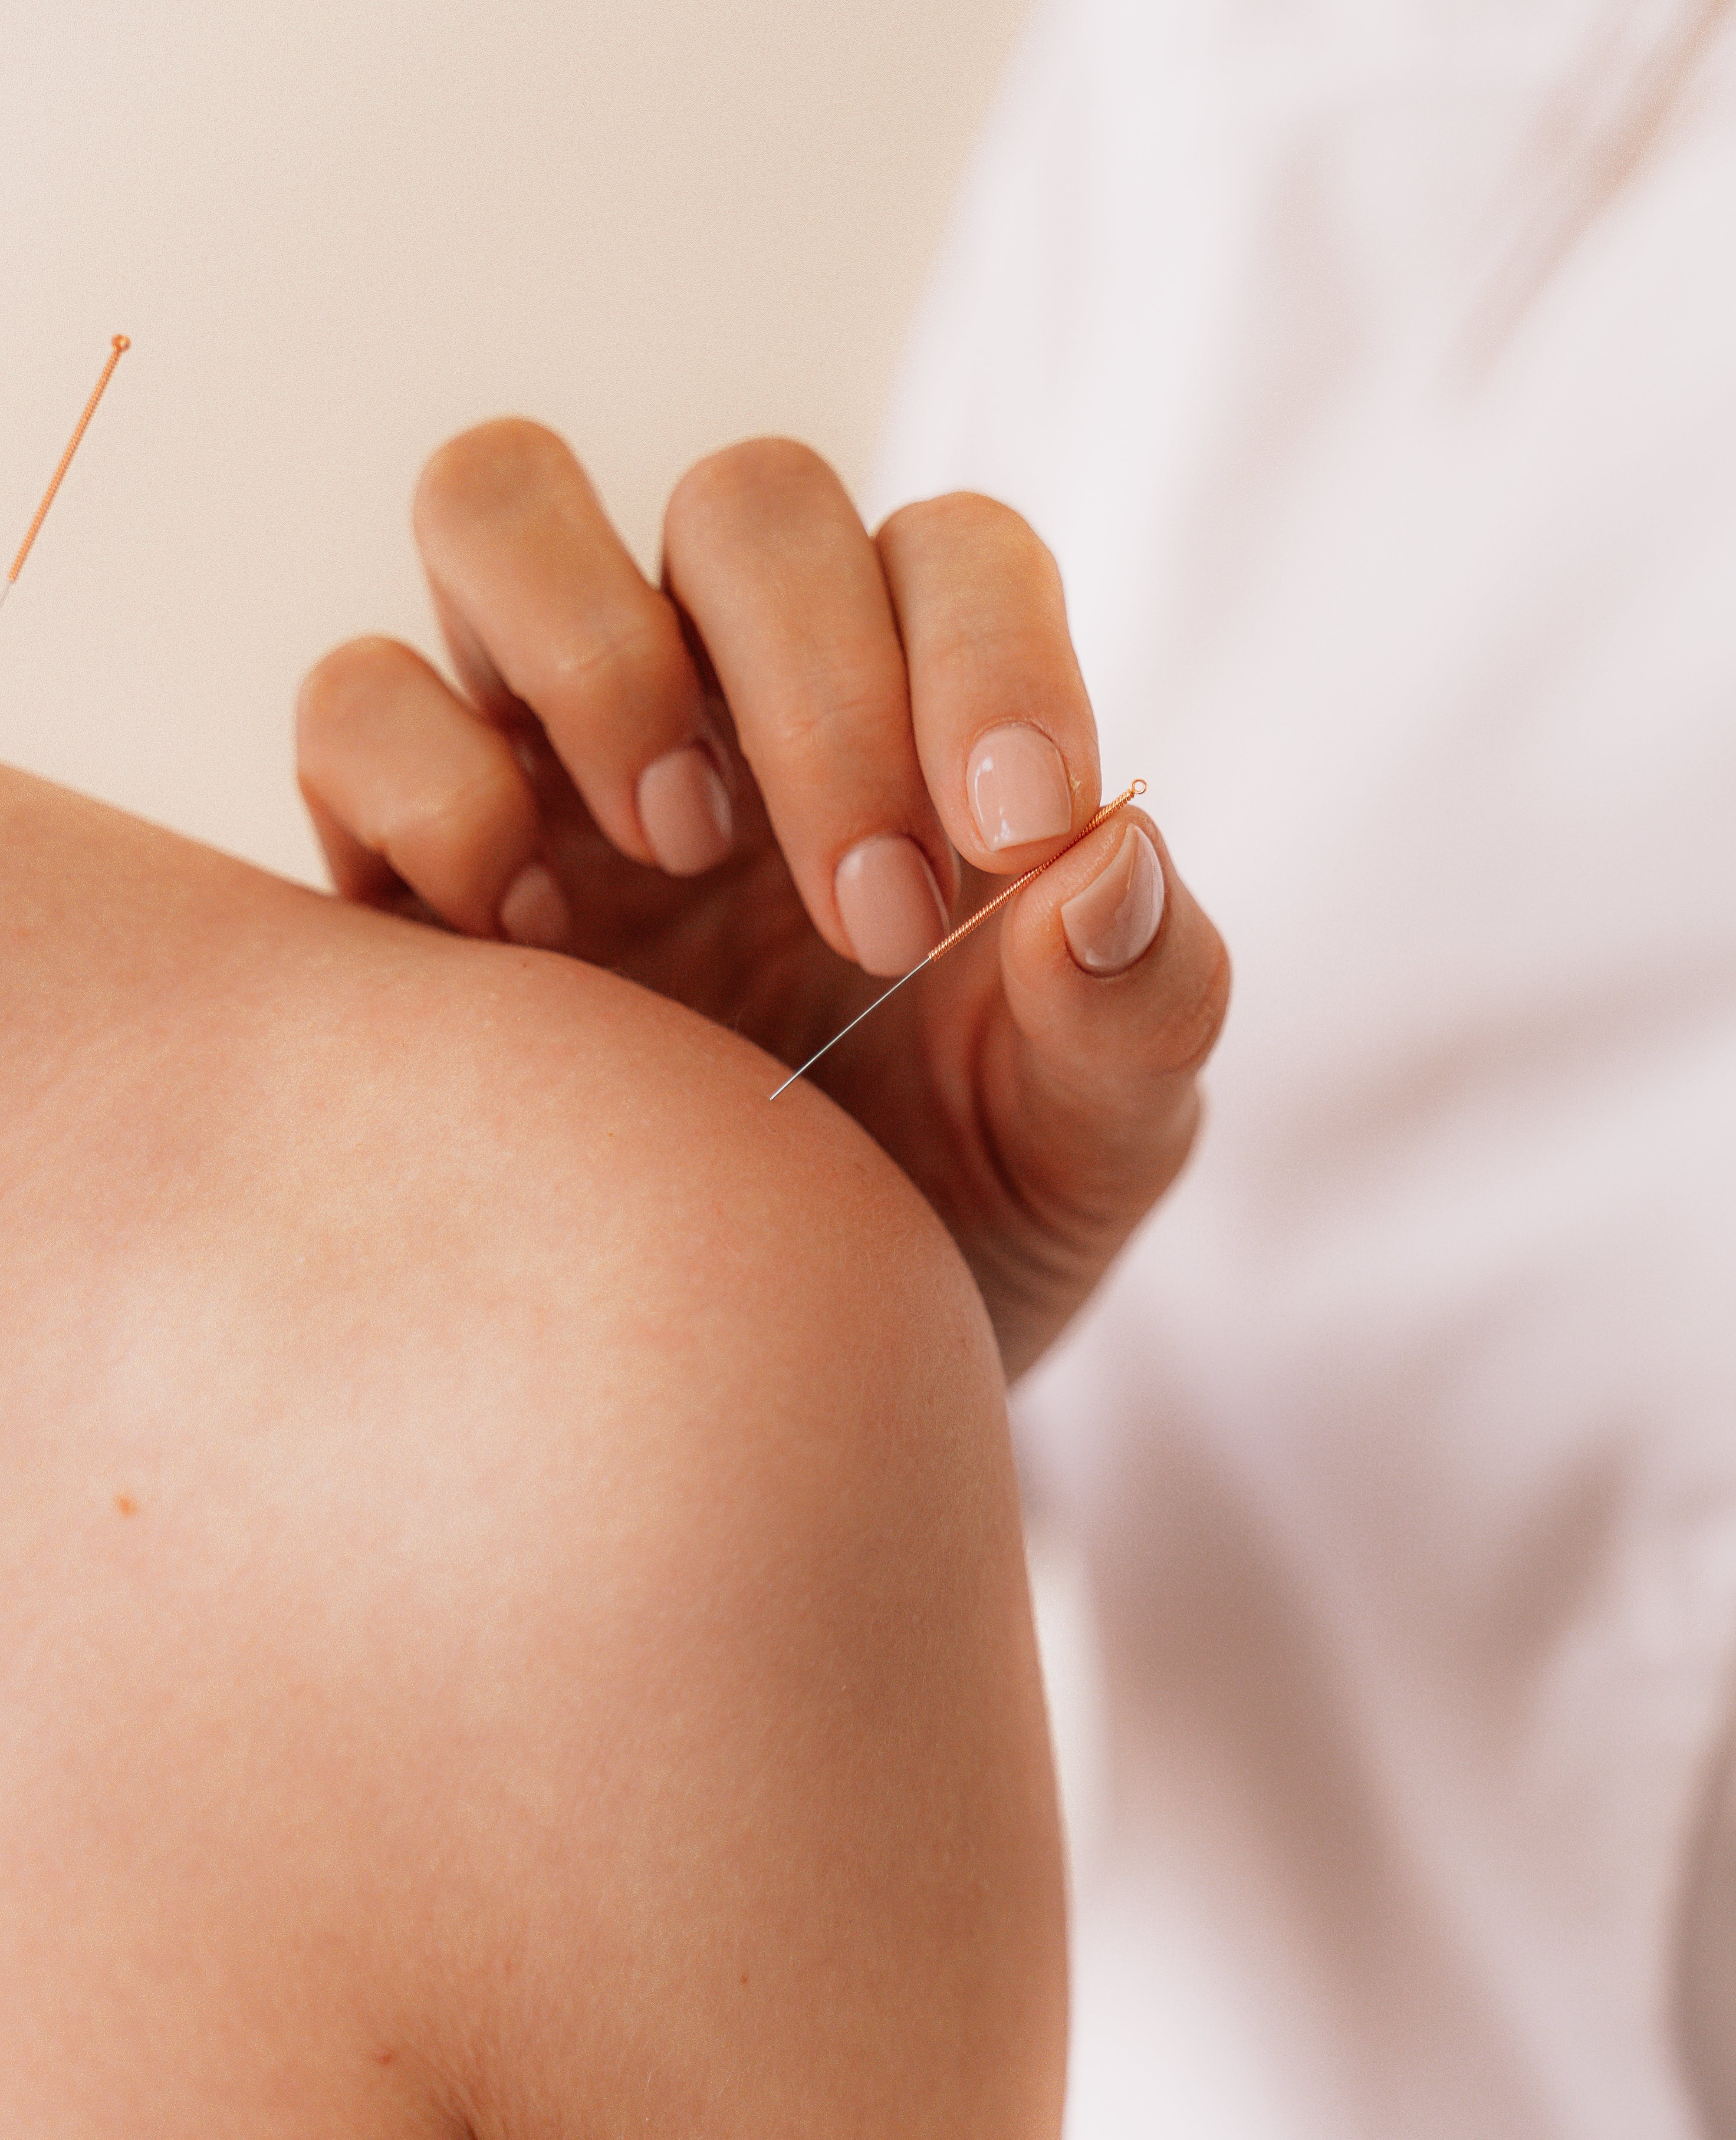 Can Acupuncture Help Anxiety